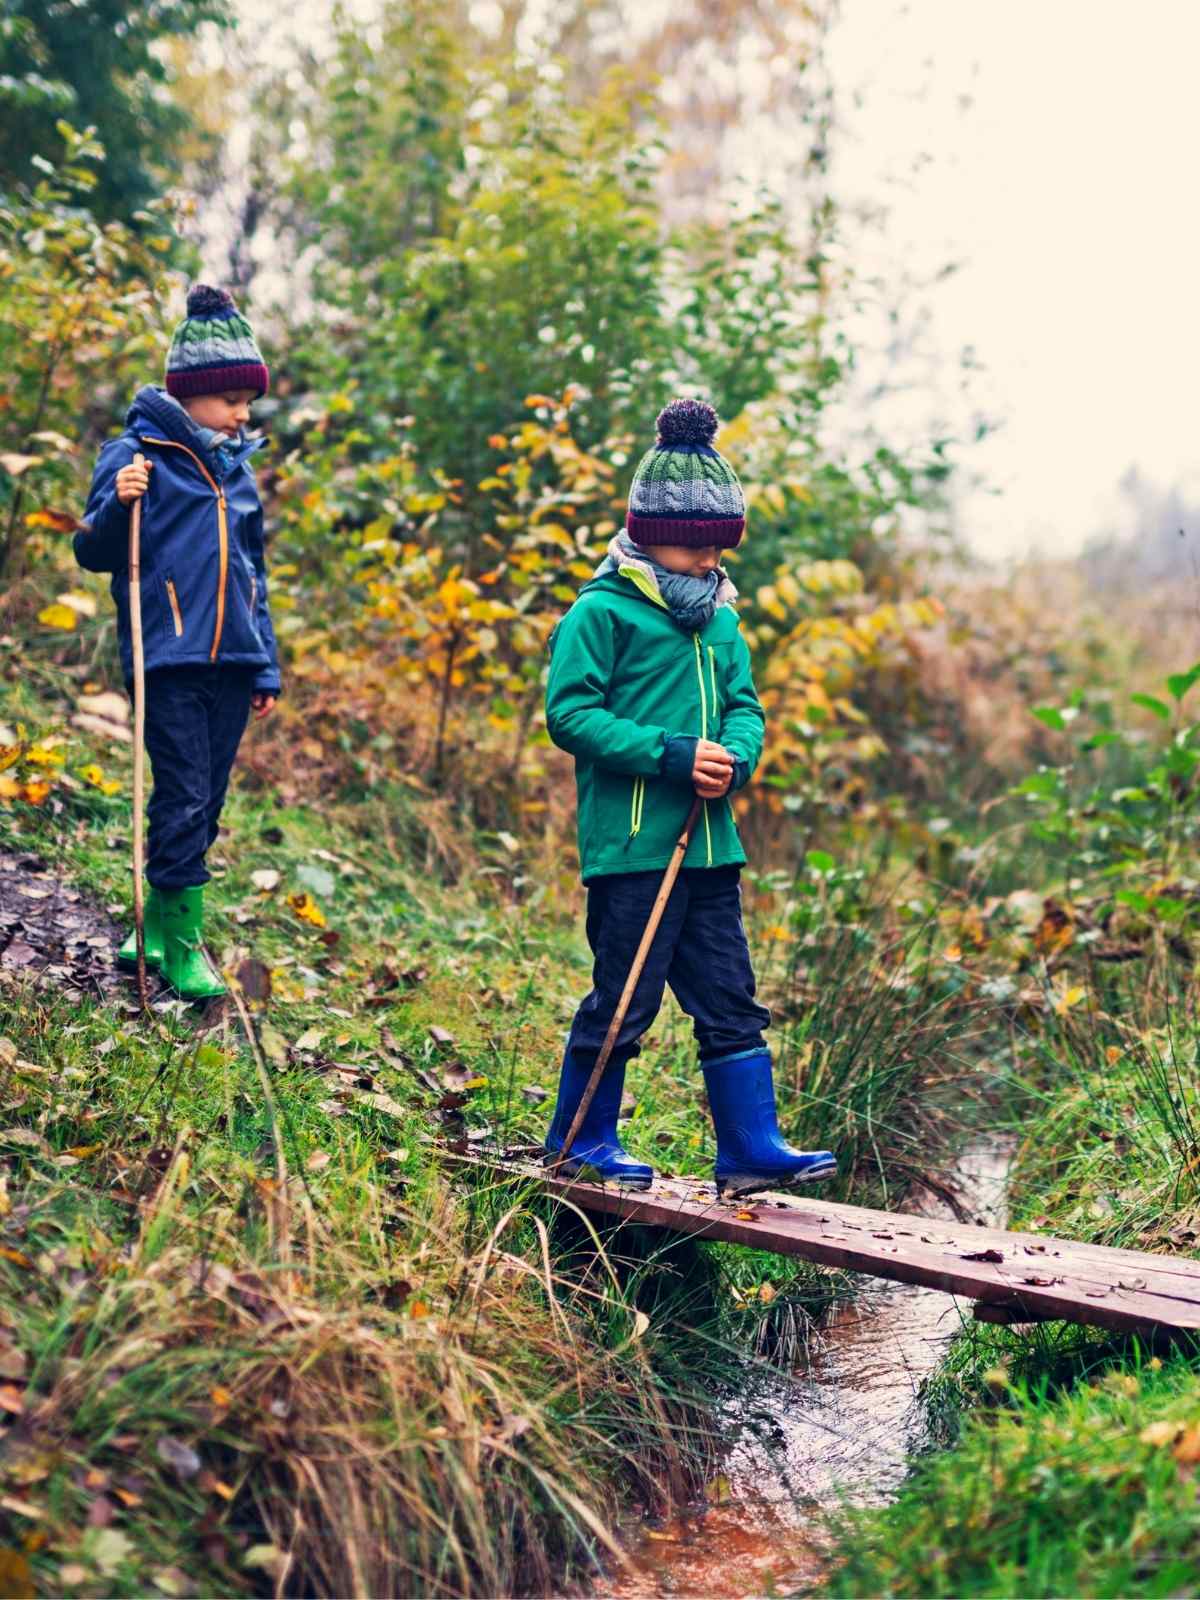 two children bundled up in jackets, rain boots, and winter hats walking outside in a natural fall landscape. Both children holding walking sticks one walking on a wooden board across a small stream